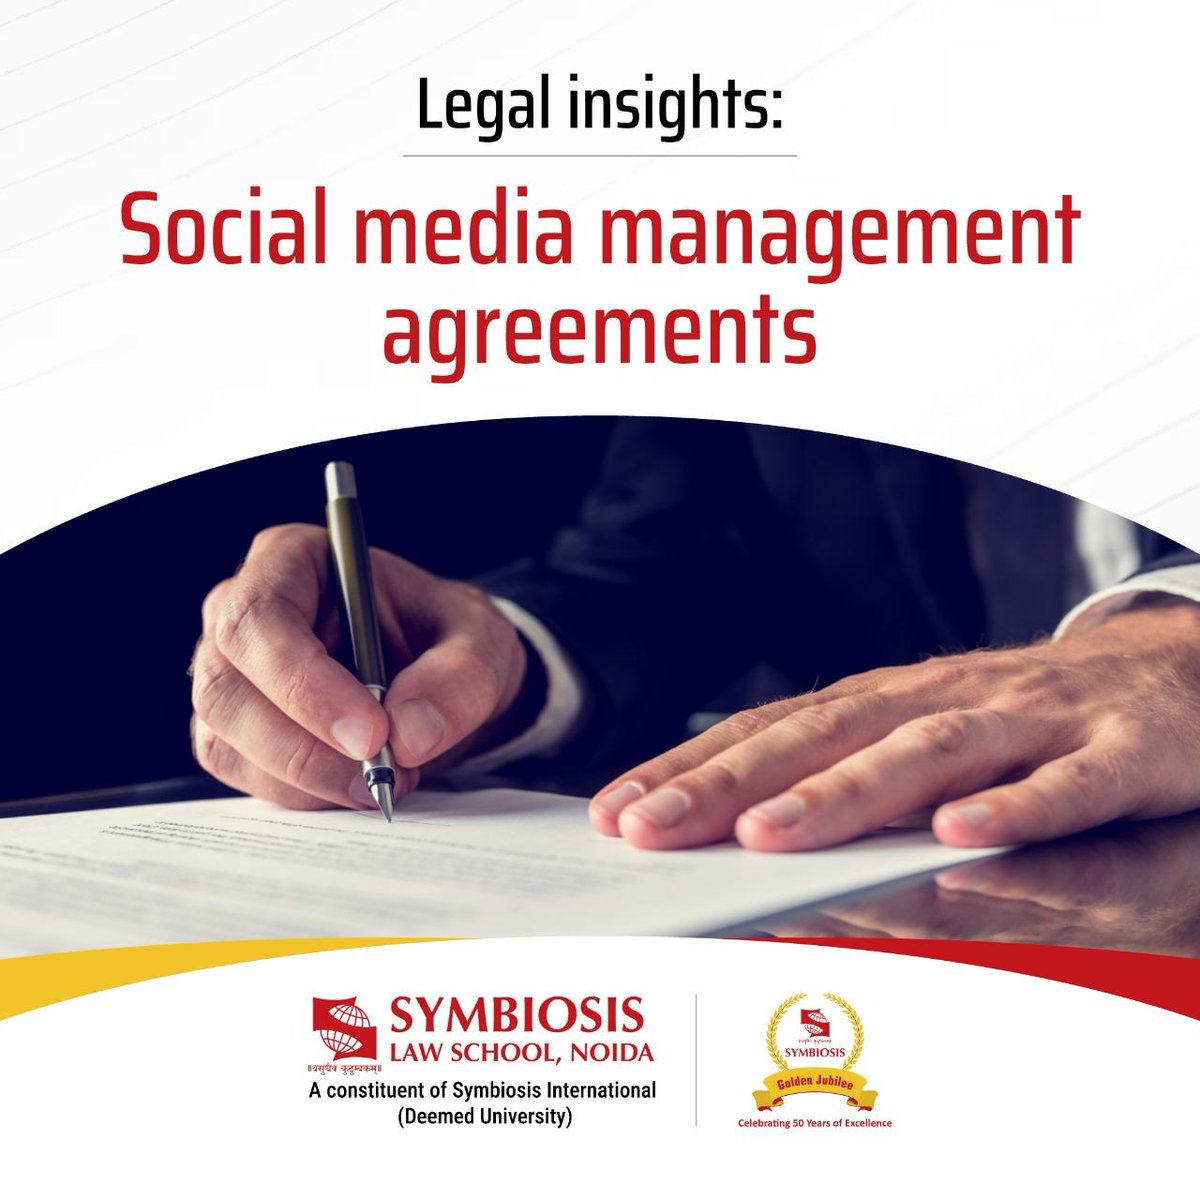 A social media management agreement outlines the partnership, work scope, payment and content duties across platforms. Essential for setting boundaries and protecting interests in digital collaboration. . . . #symbiosislawschool #noida #socialmedia #Agreement #DigitalLandscape